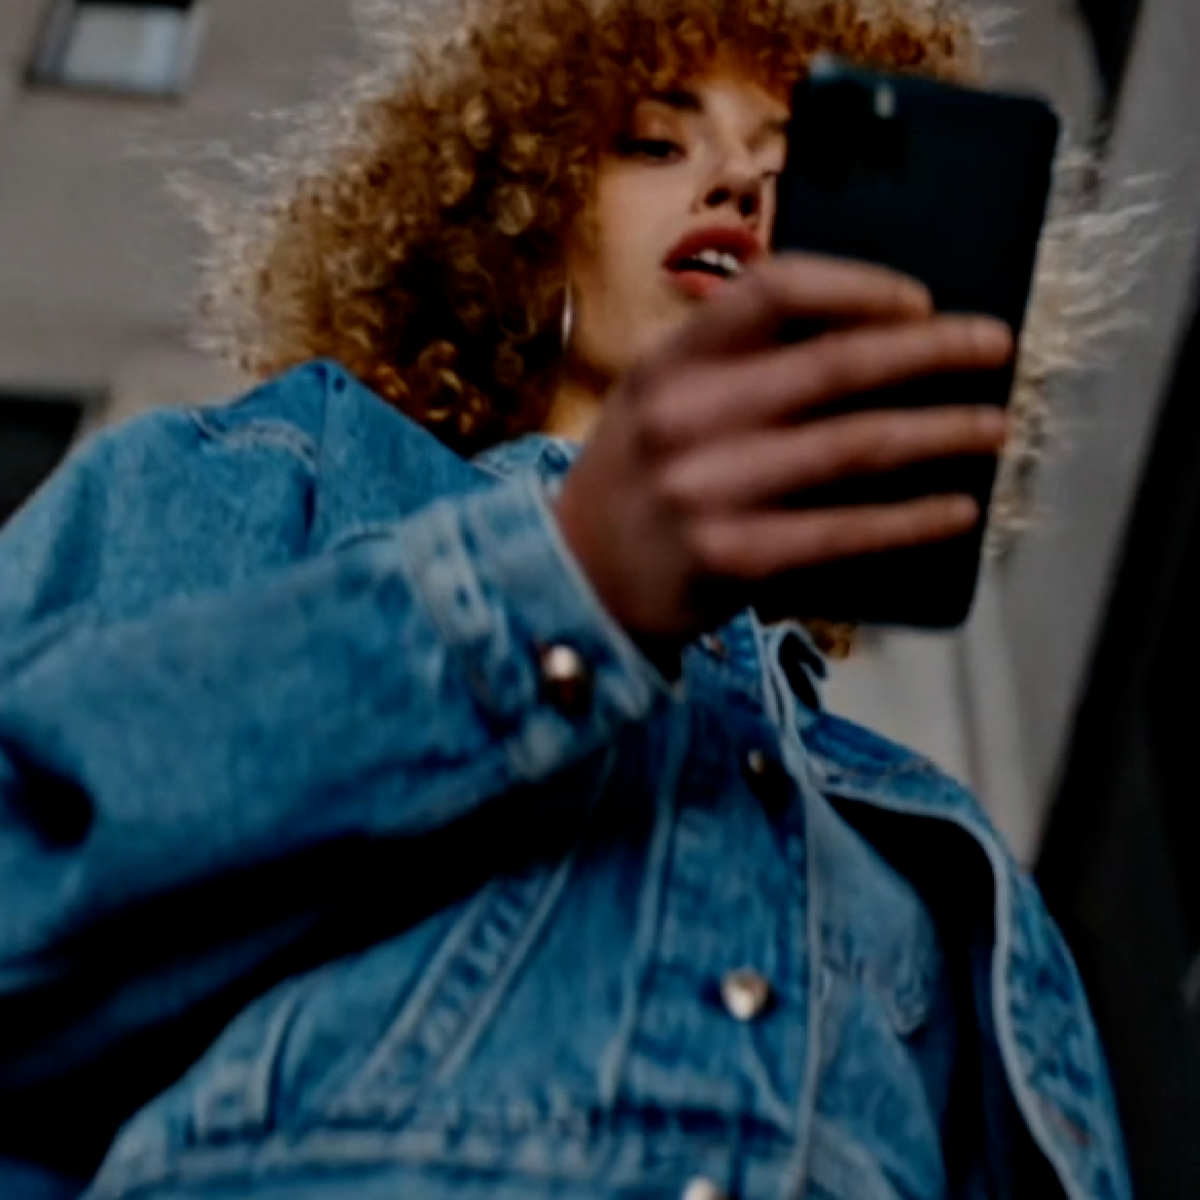 Woman with curly hair looking down at her mobile phone